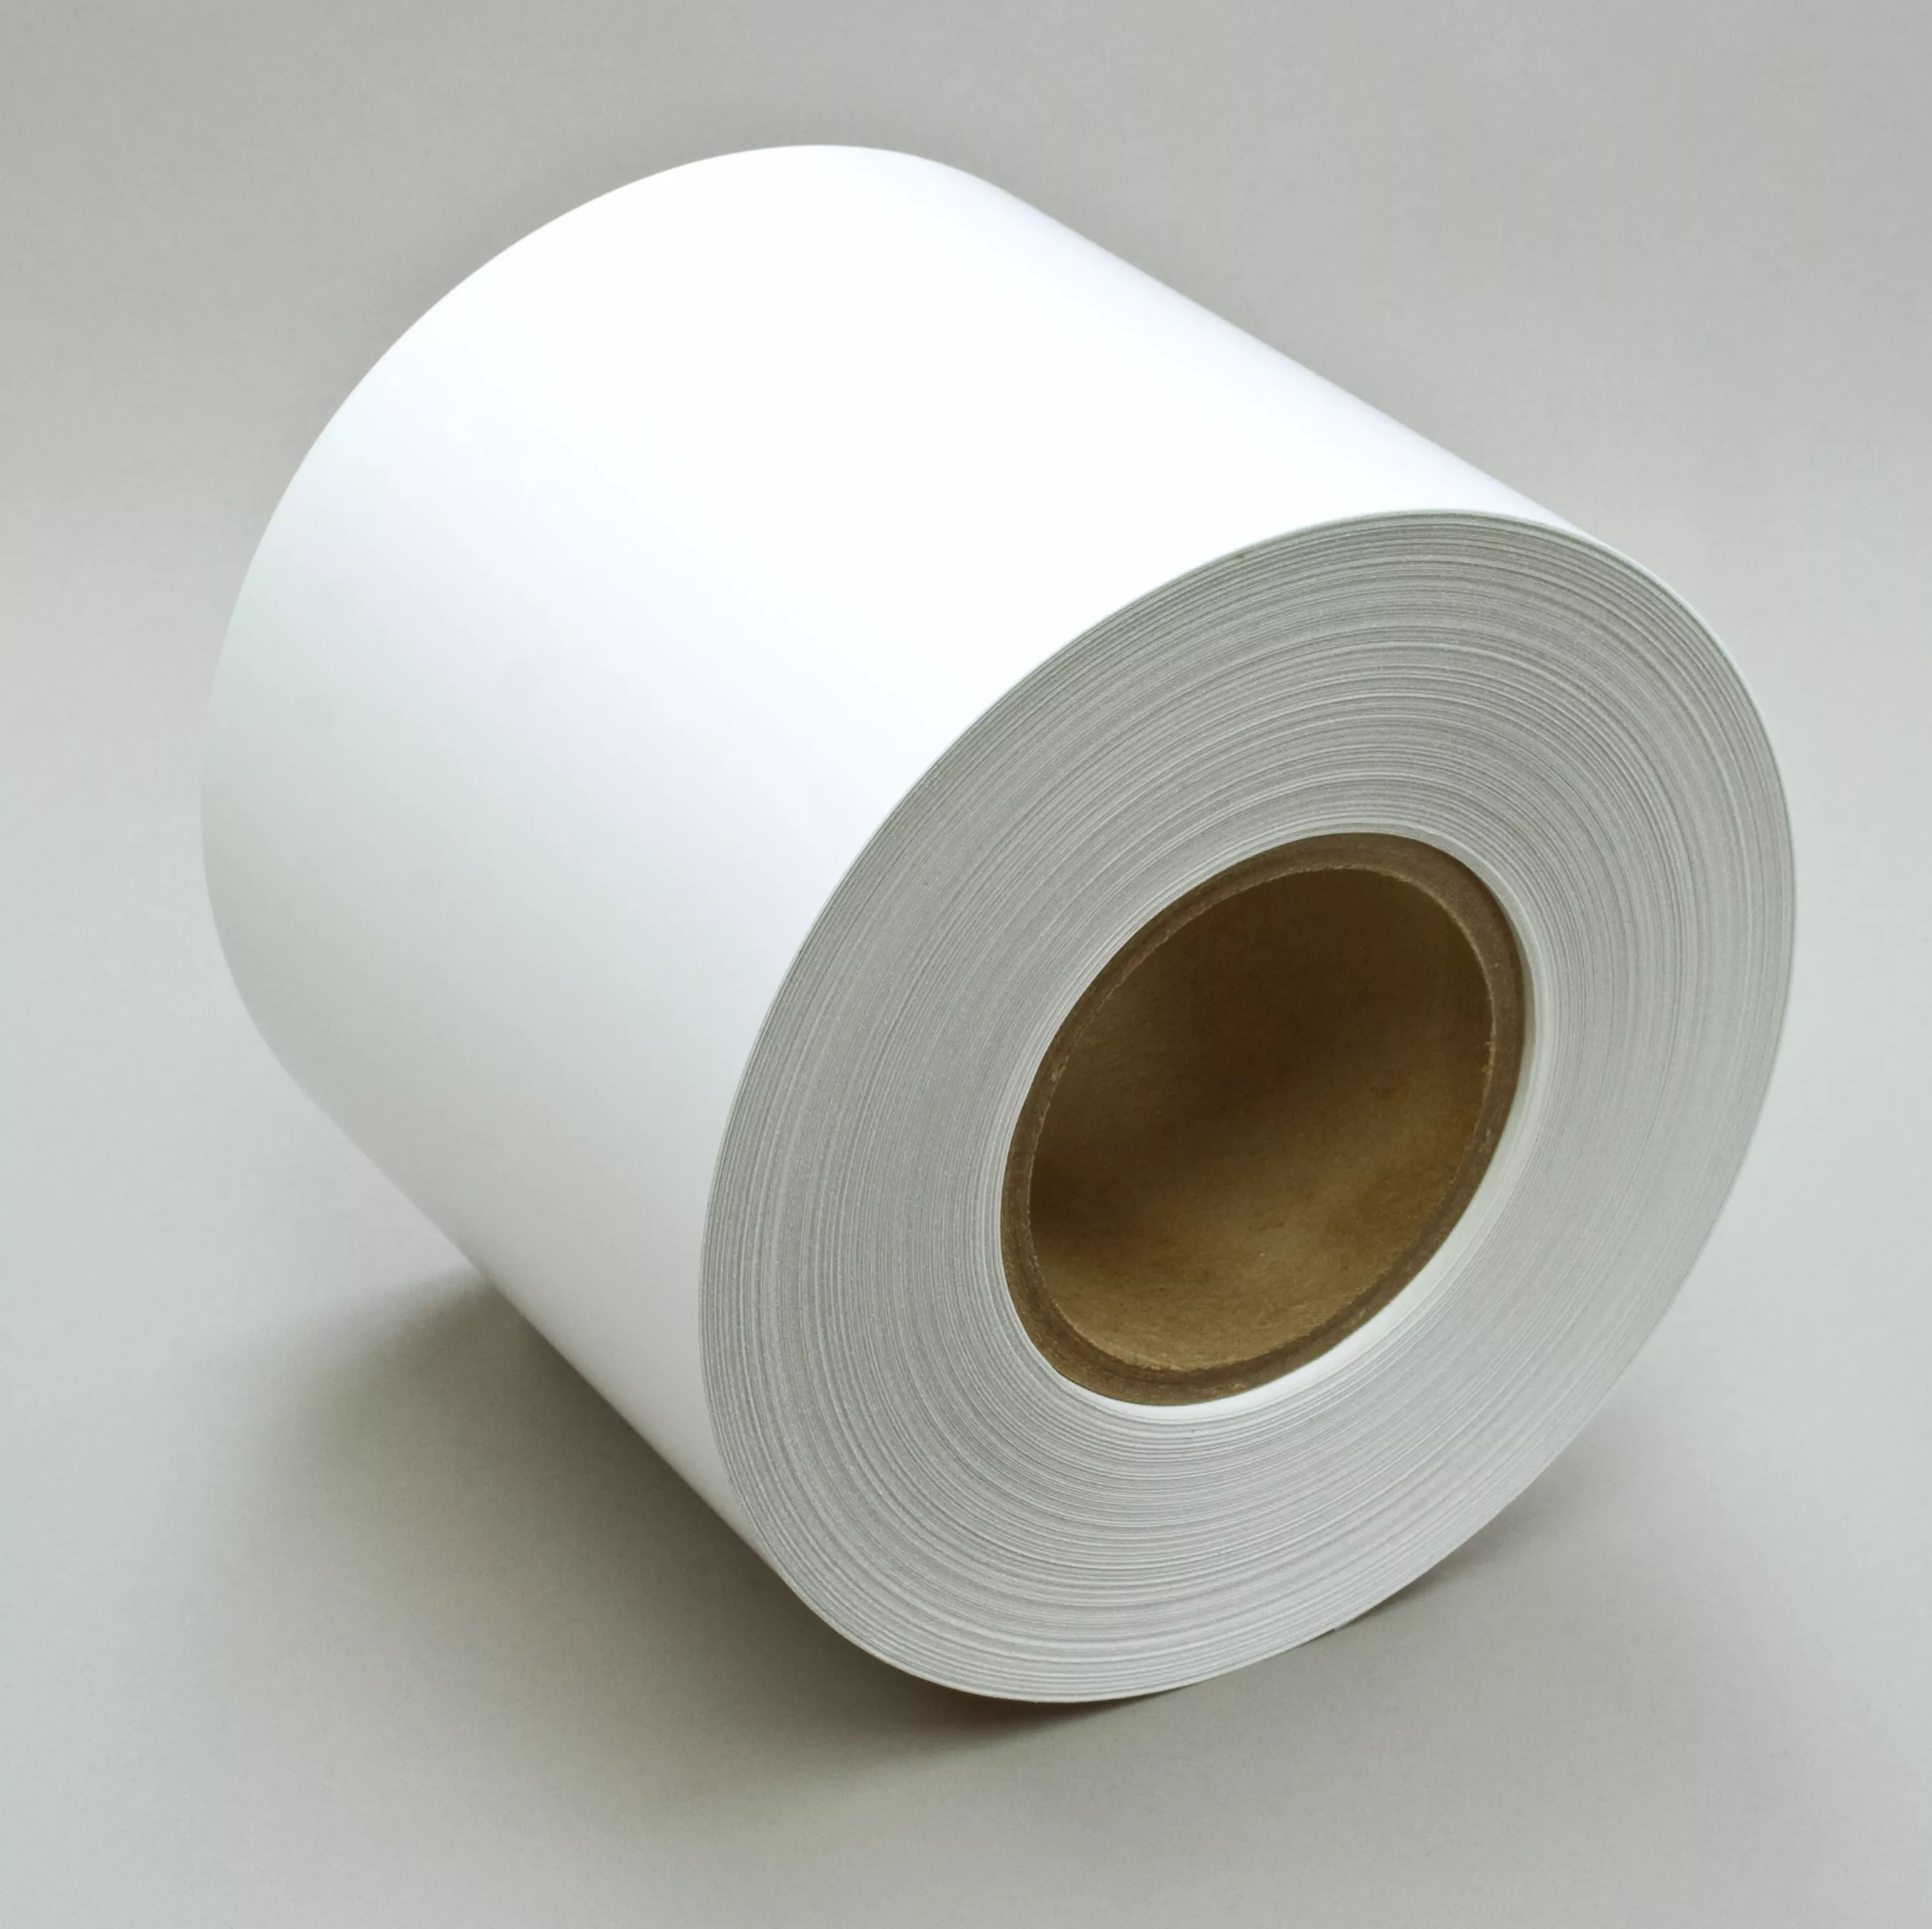 3M™ Dot Matrix Label Material 7883, Silver Polyester Matte, 6 in x 1668
ft, 1 Roll/Case